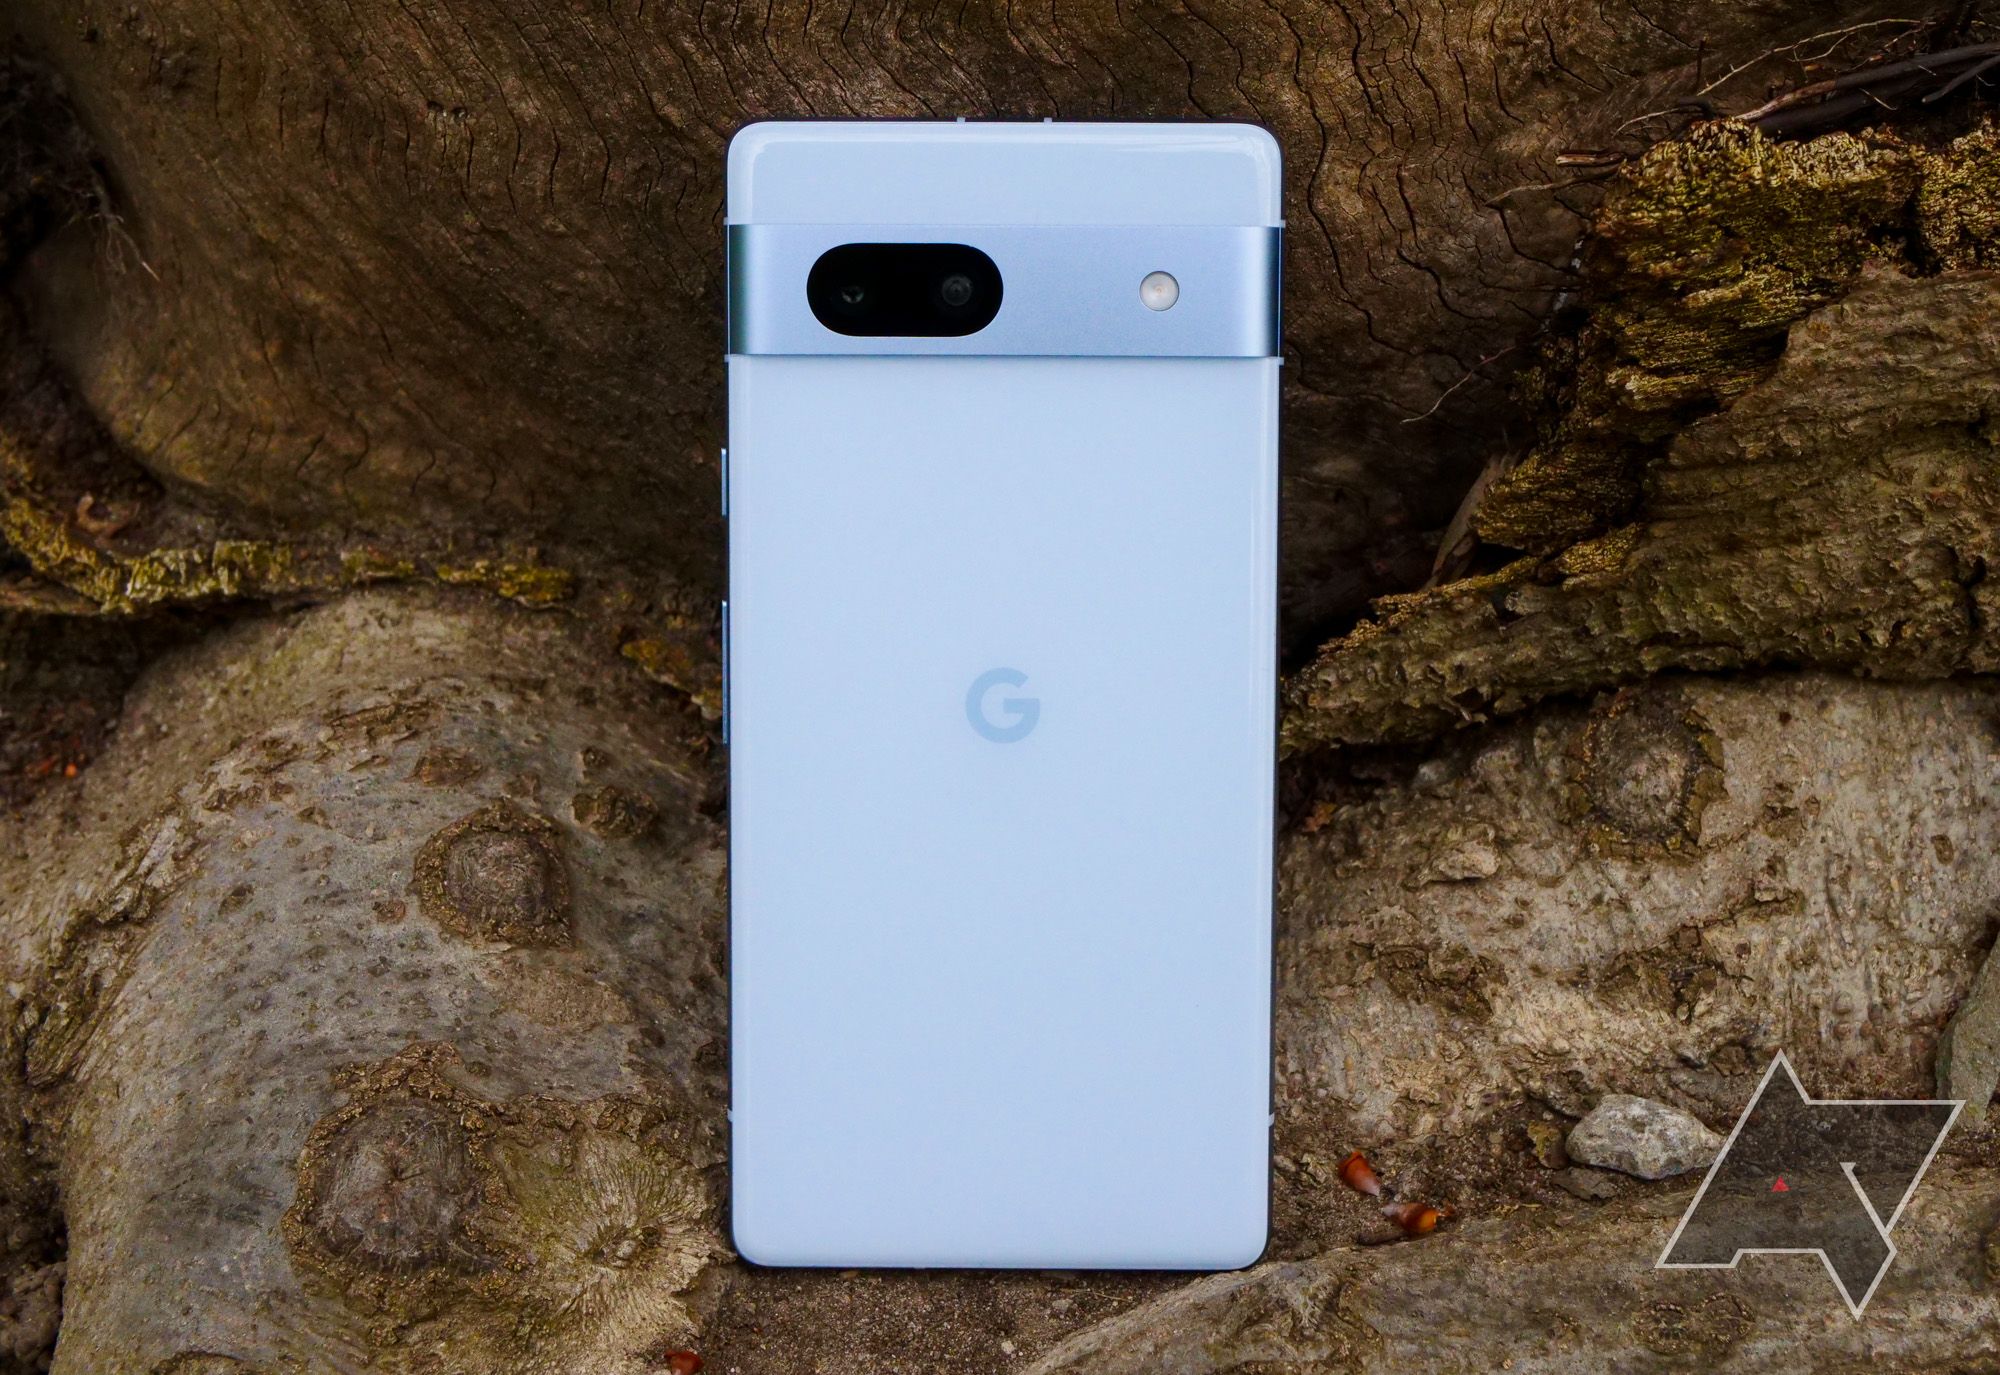 Google Pixel 7A 128GB/8GB Price in Singapore, Specifications